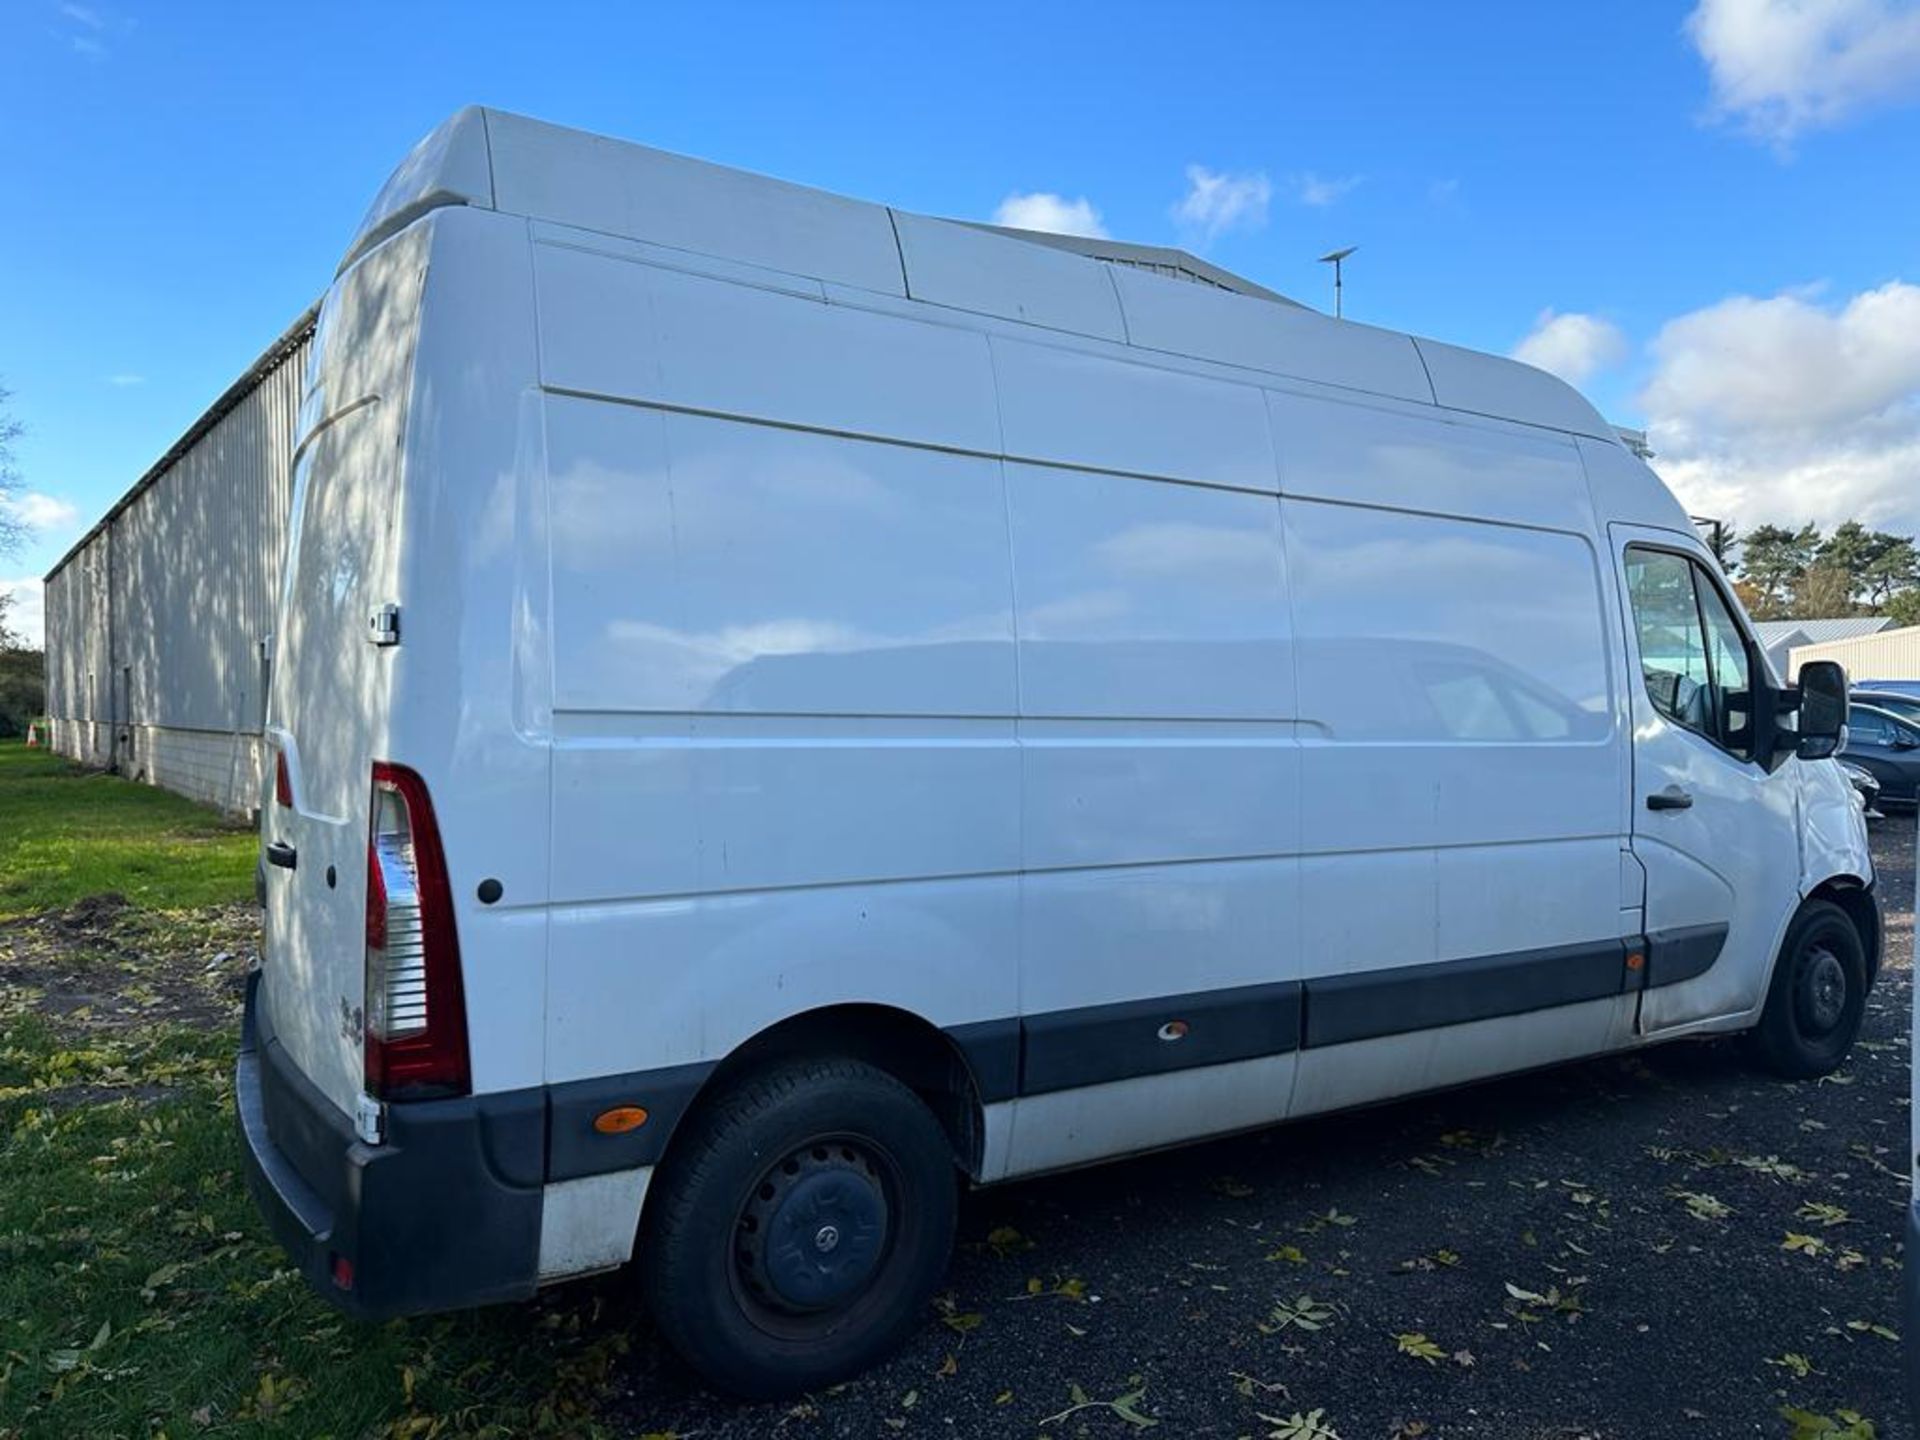 2016 16 VAUXHALL MOVANO PANEL VAN - L3 H3 MODEL - 118K MILES - PLY LINED - Image 5 of 10